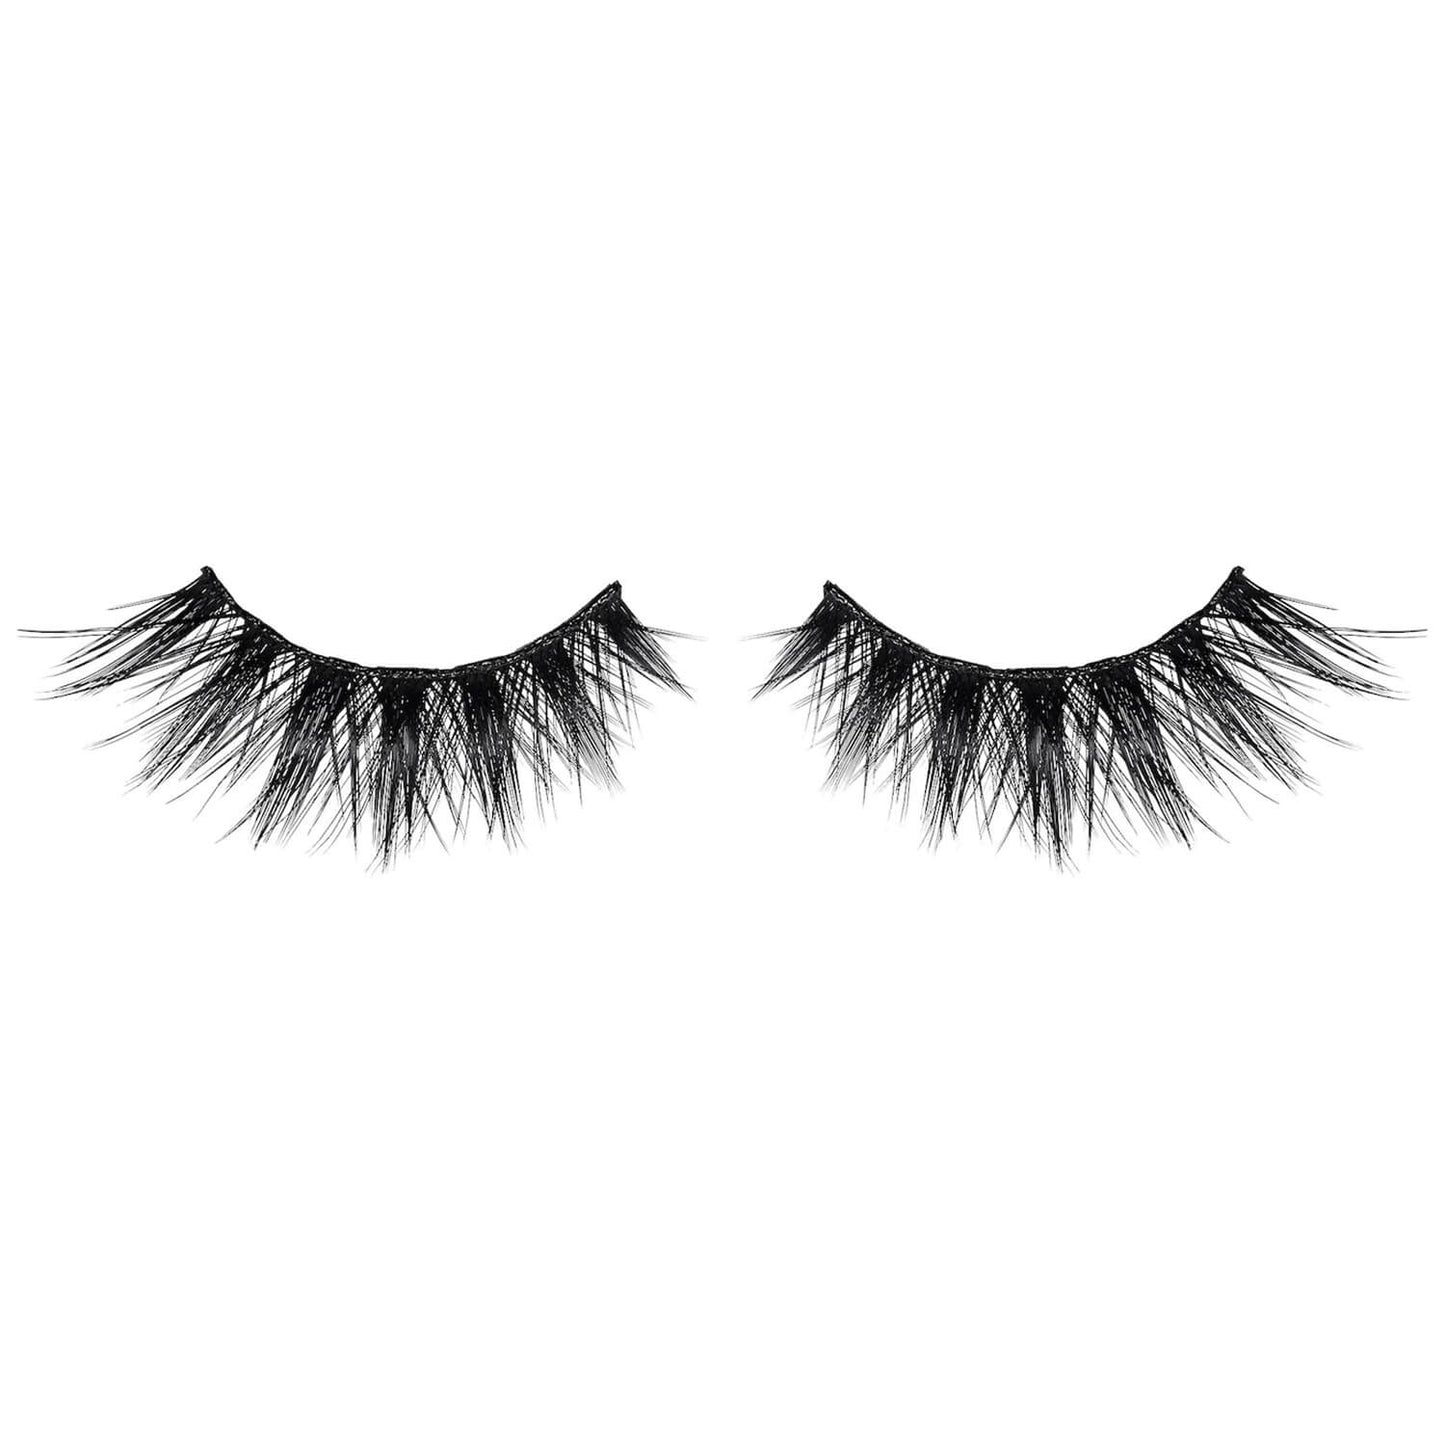 Huda Beauty Classic Lashes - Scarlett available at Heygirl.pk for delivery in Karachi, Lahore, Islamabad across Pakistan. 